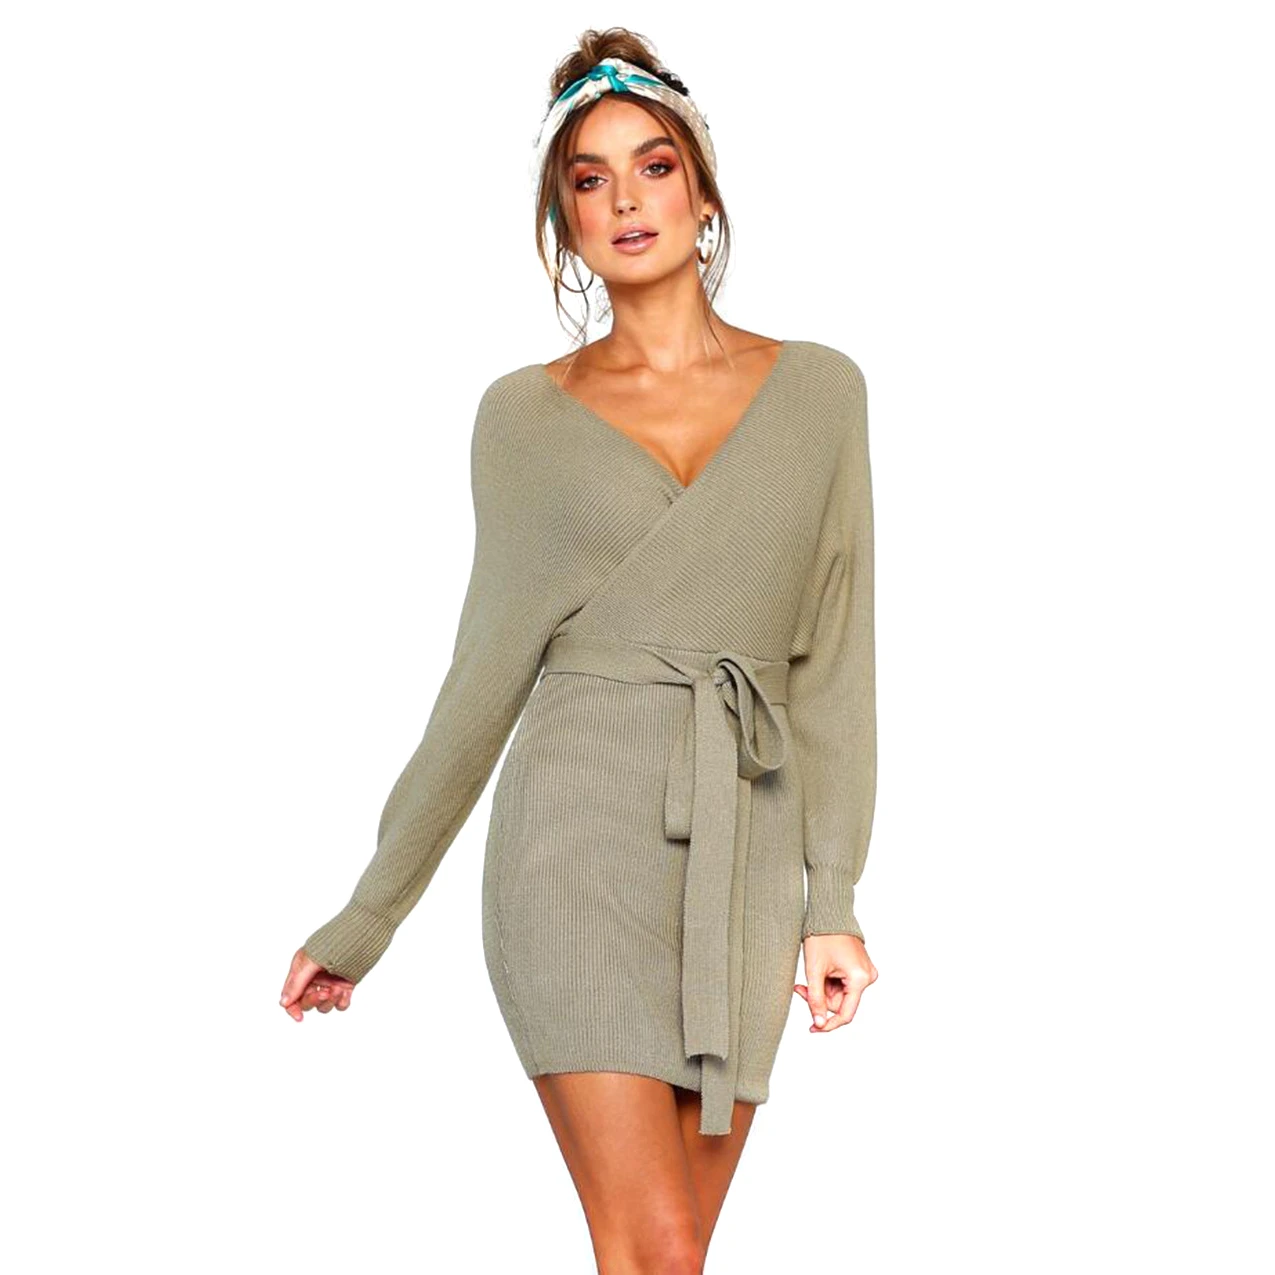 Women Autumn and Winter Long Sleeve Knitting V Neck Backless Sexy Sweater Dress with Belted